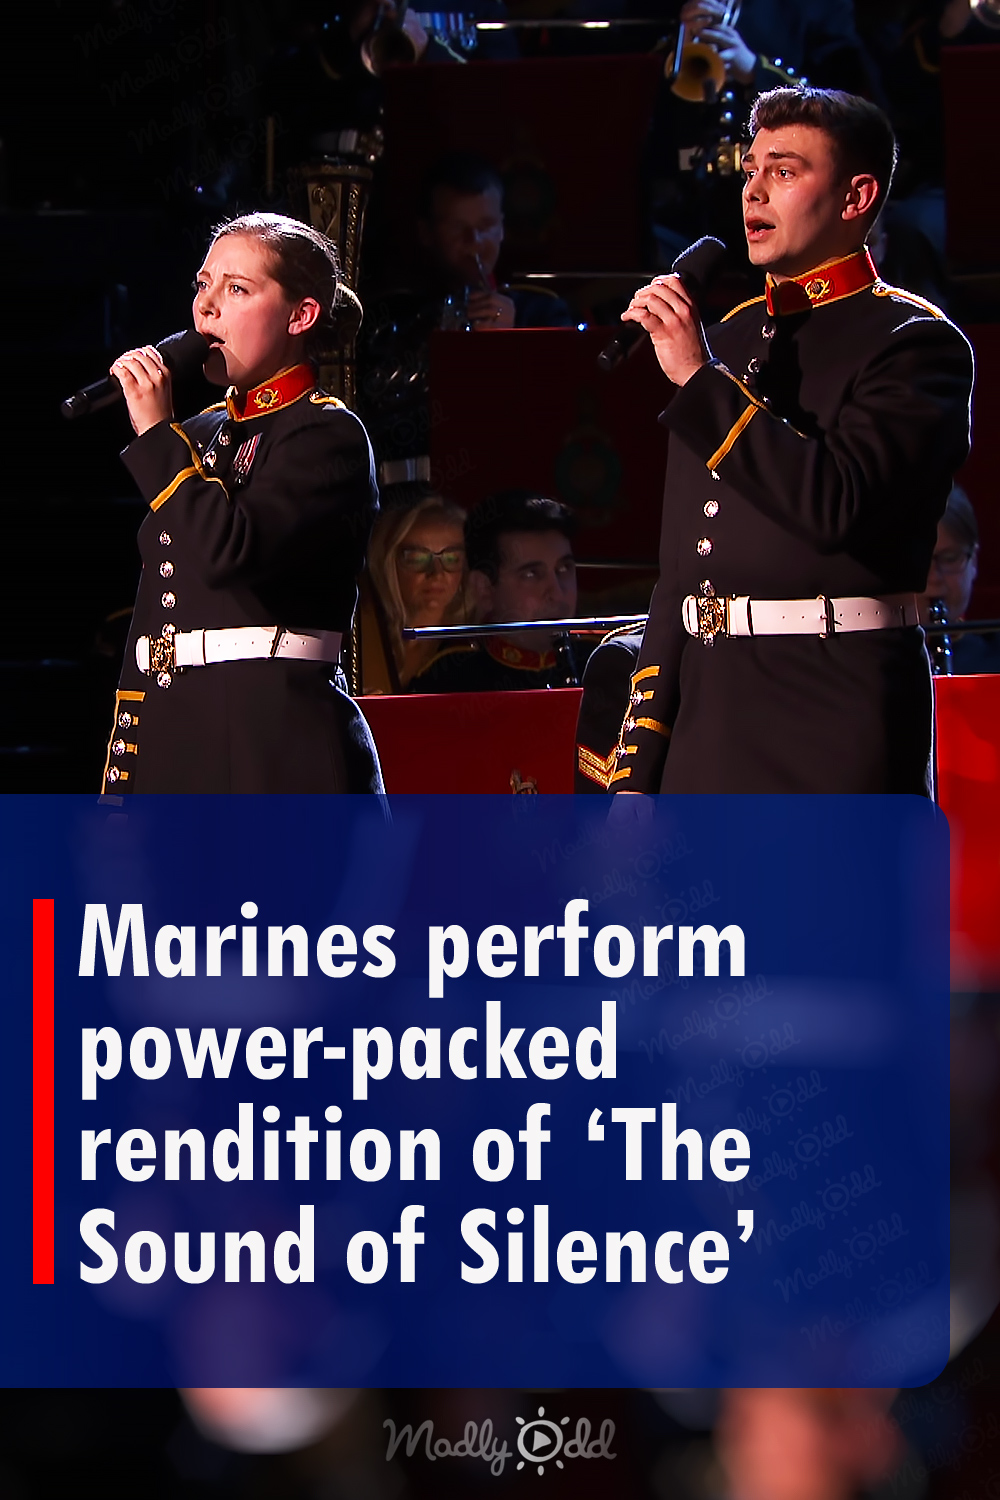 Marines perform power-packed rendition of \'The Sound of Silence\'